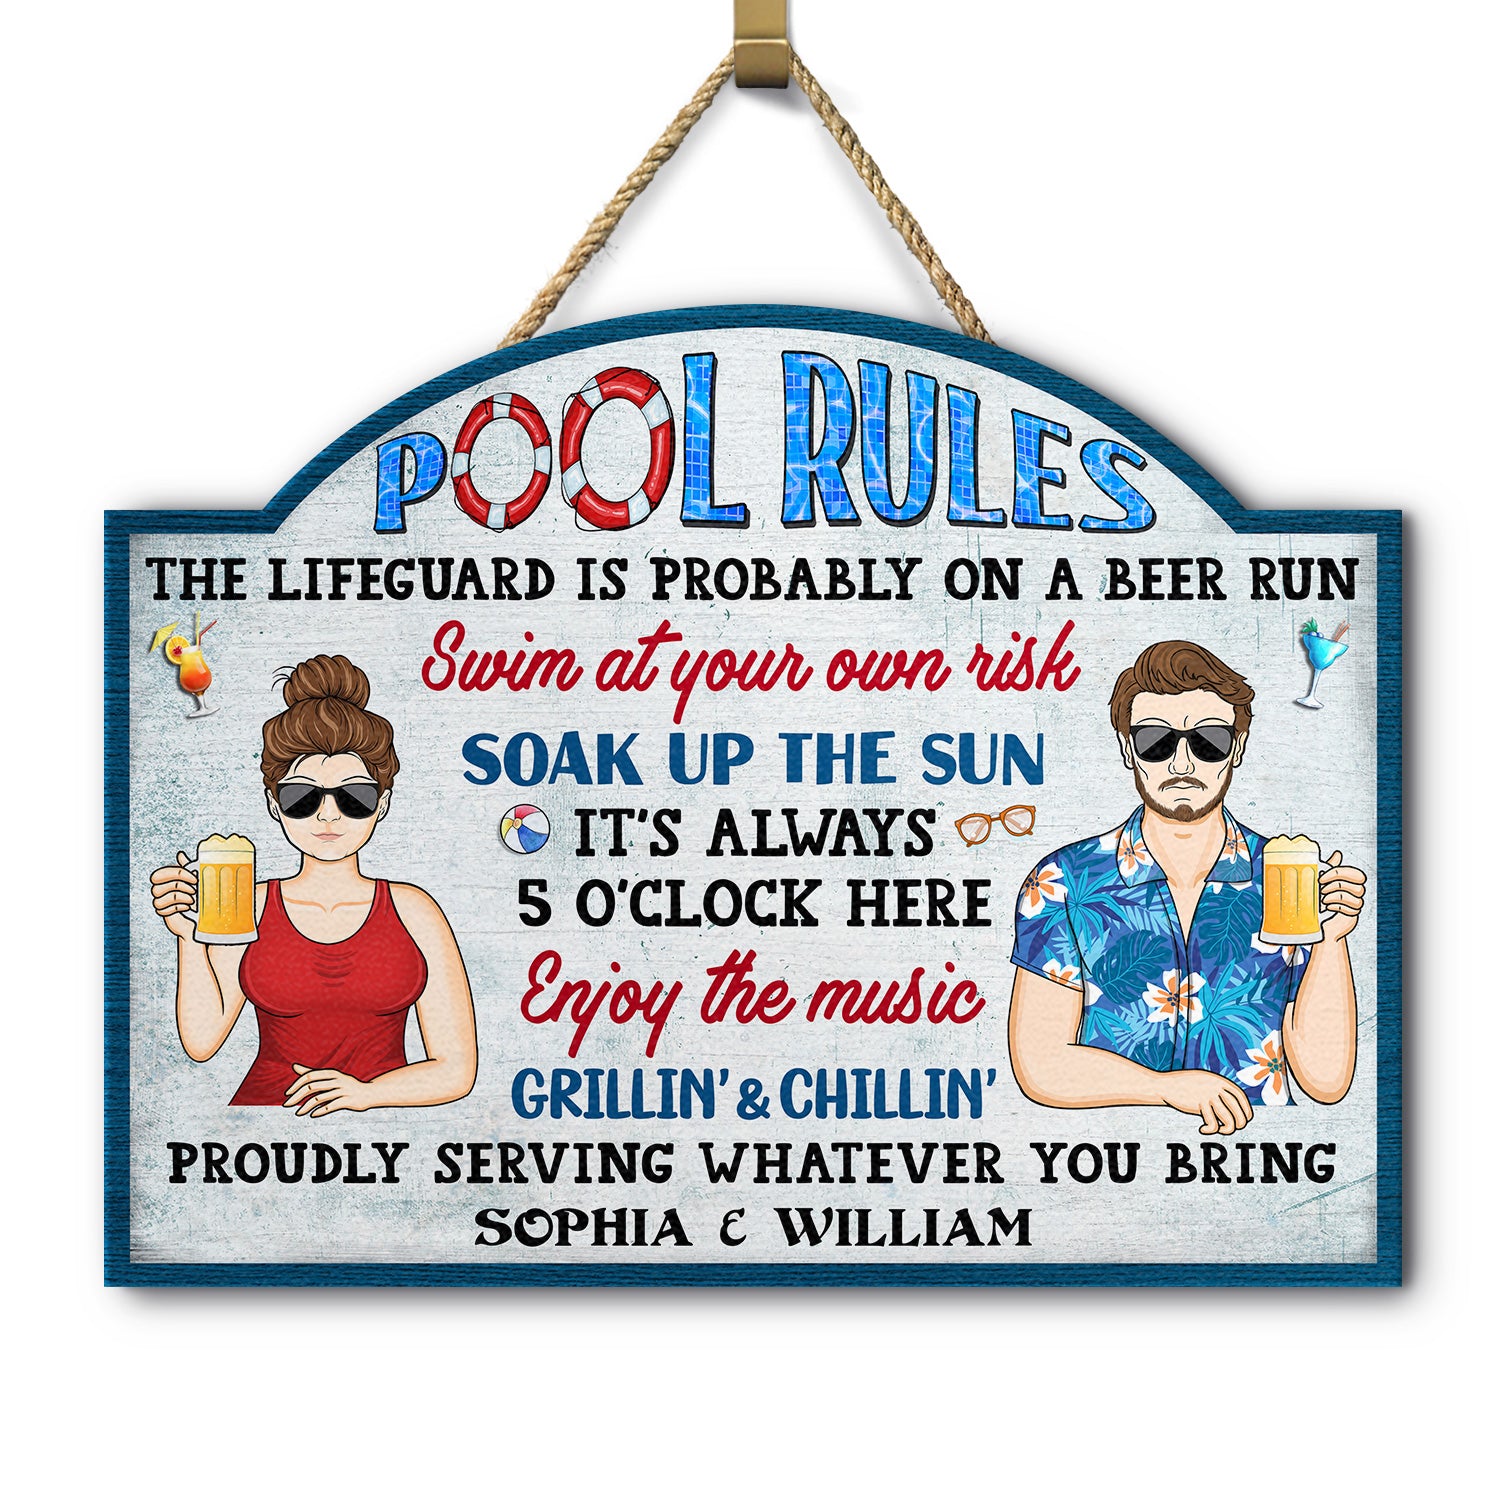 Pool Rules Swim At Your Own Risk Grilling - Home Decor, Backyard Decor, Gift For Her, Him, Couples, Husband, Wife, Family - Personalized Custom Shaped Wood Sign